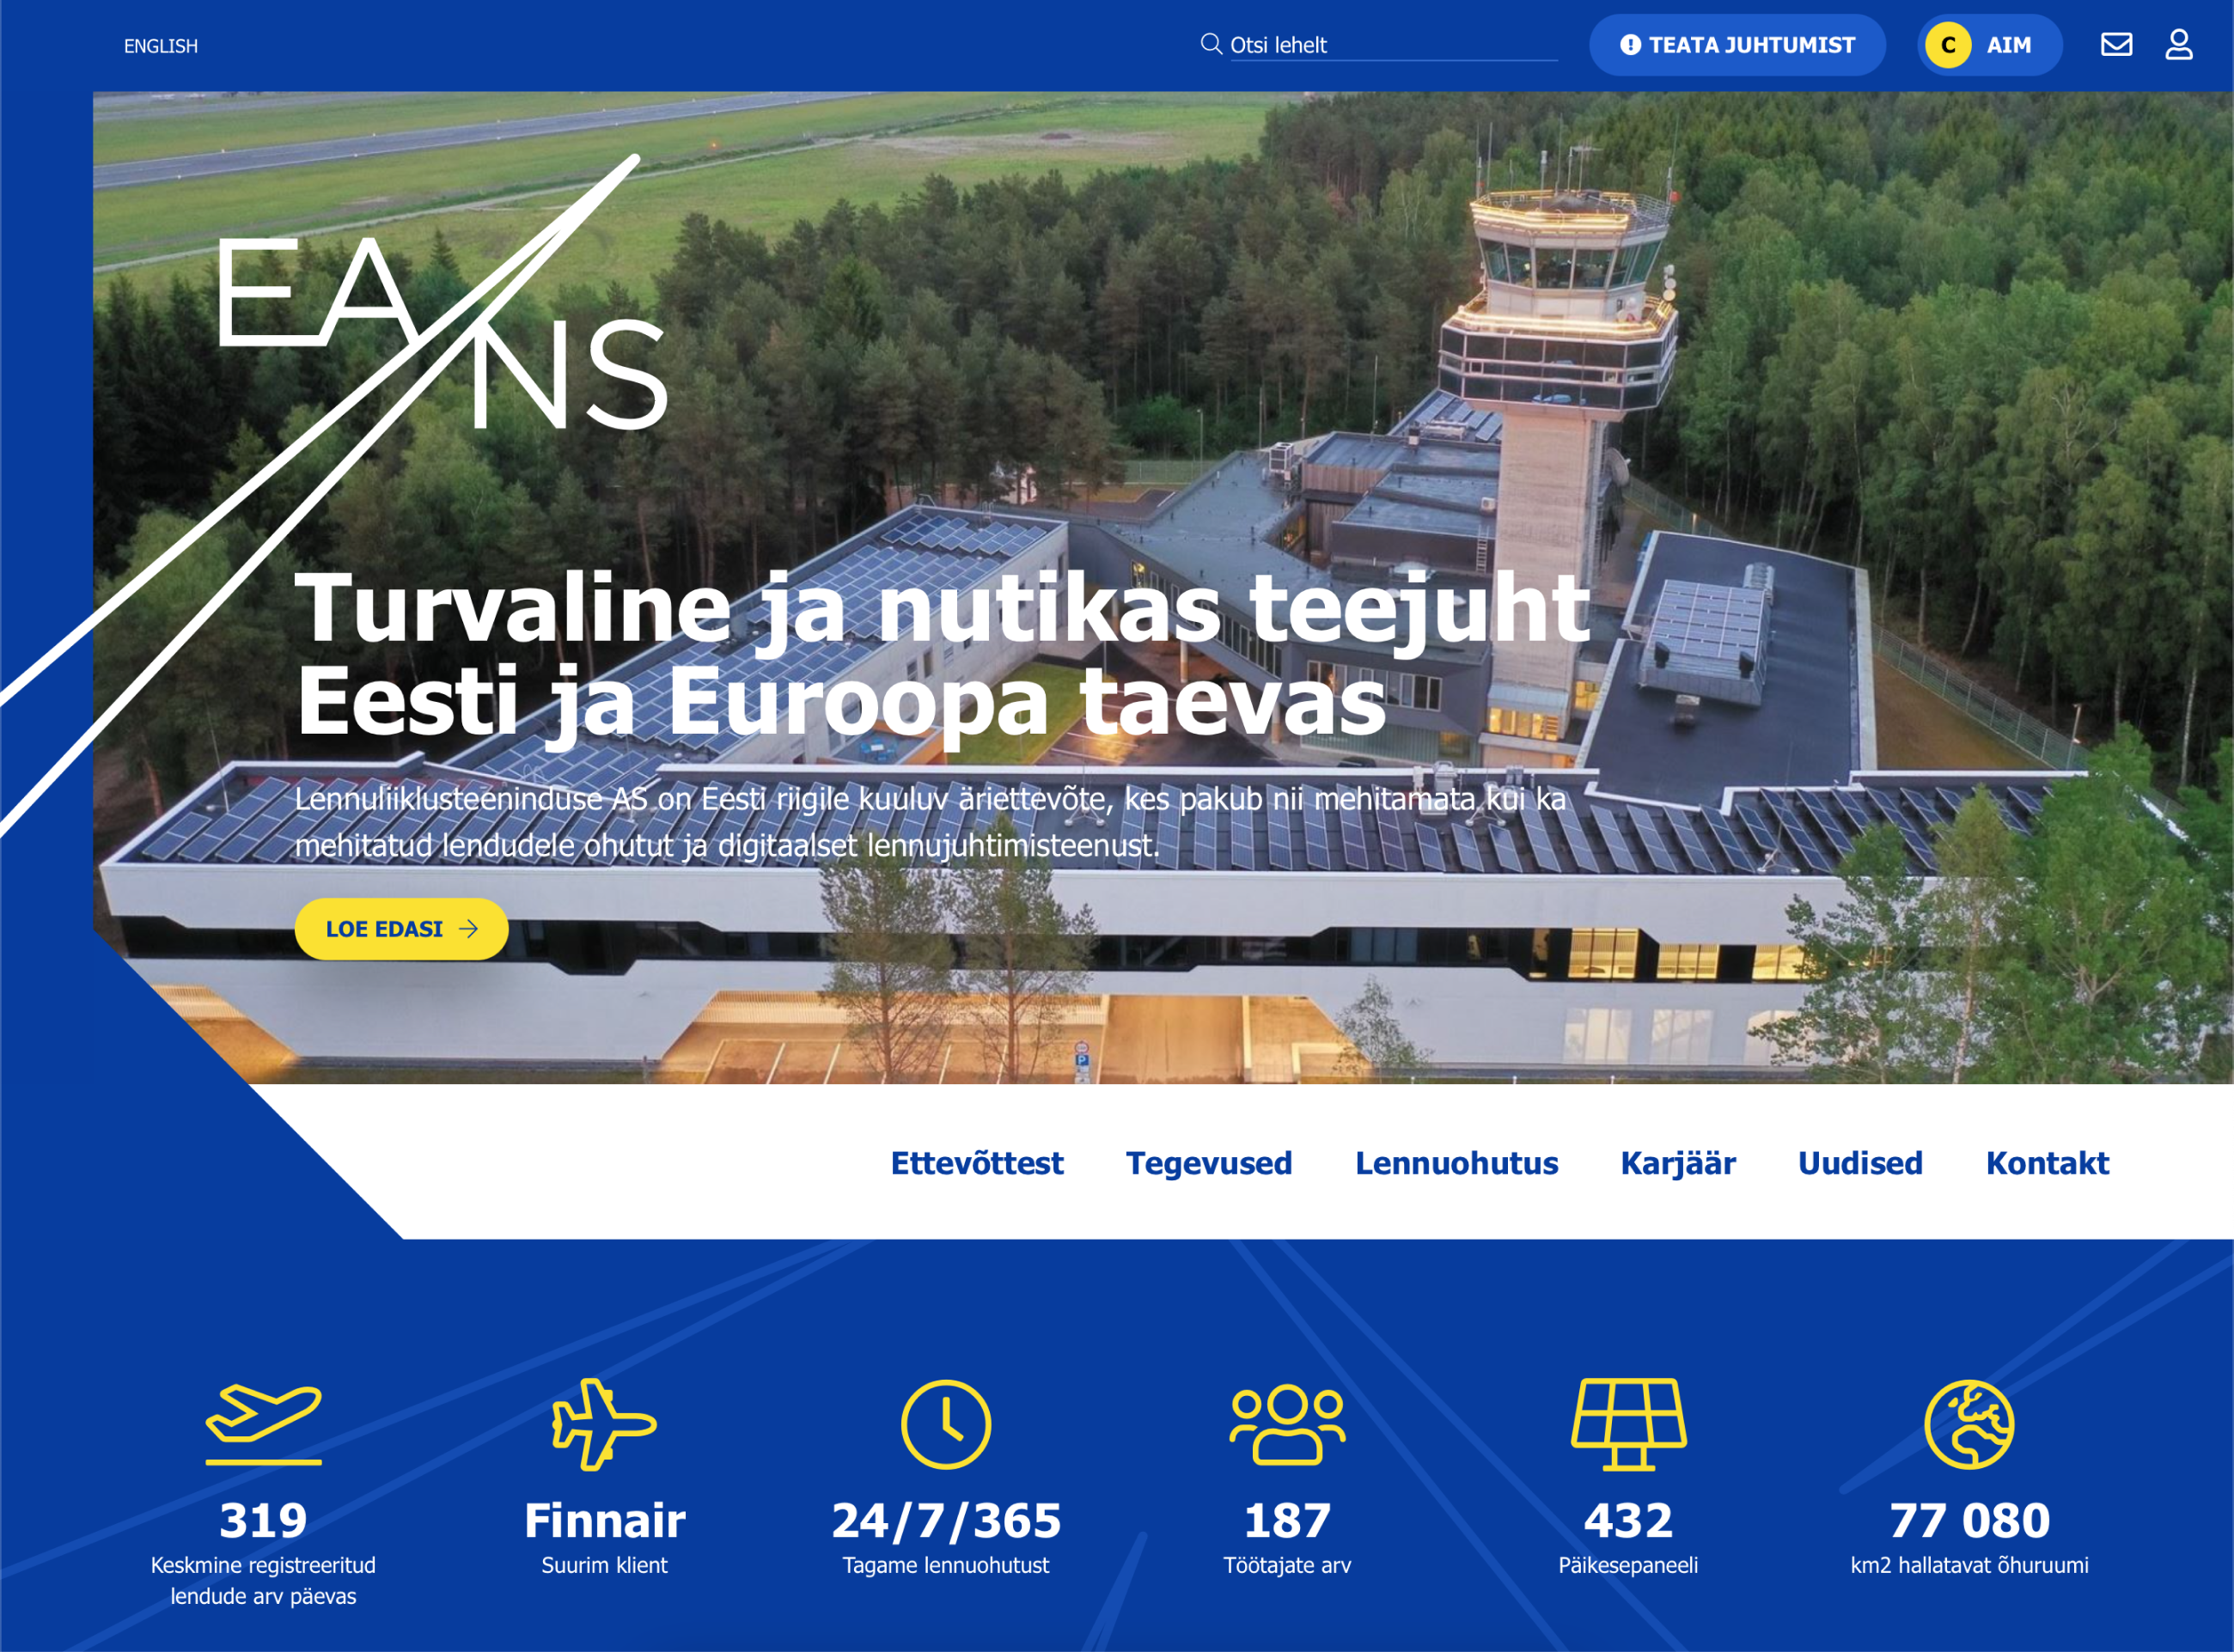 Image of EANS webpage